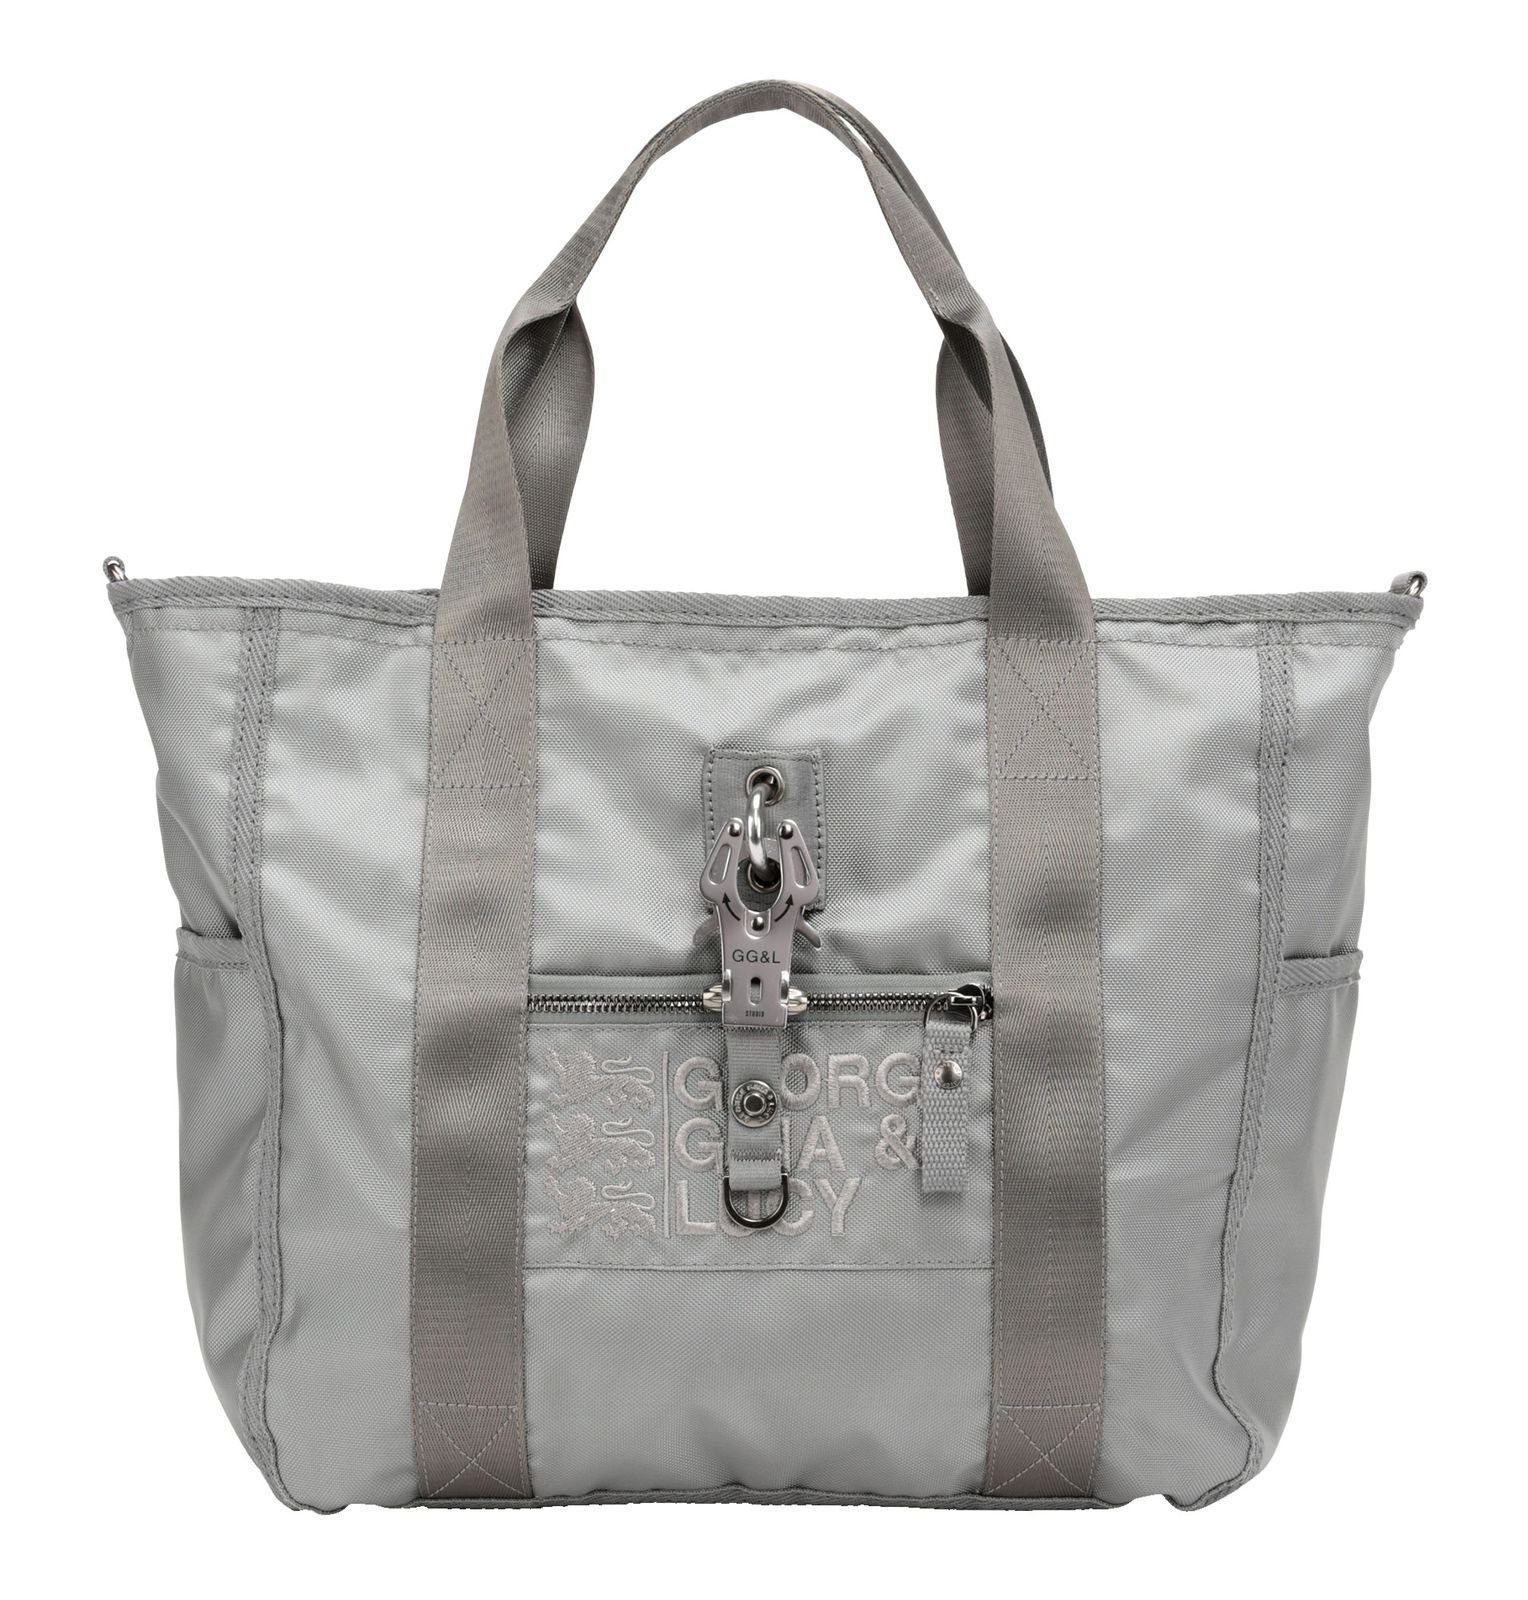 Schultertasche Stoned Gina Lucy Basic George & Nylon